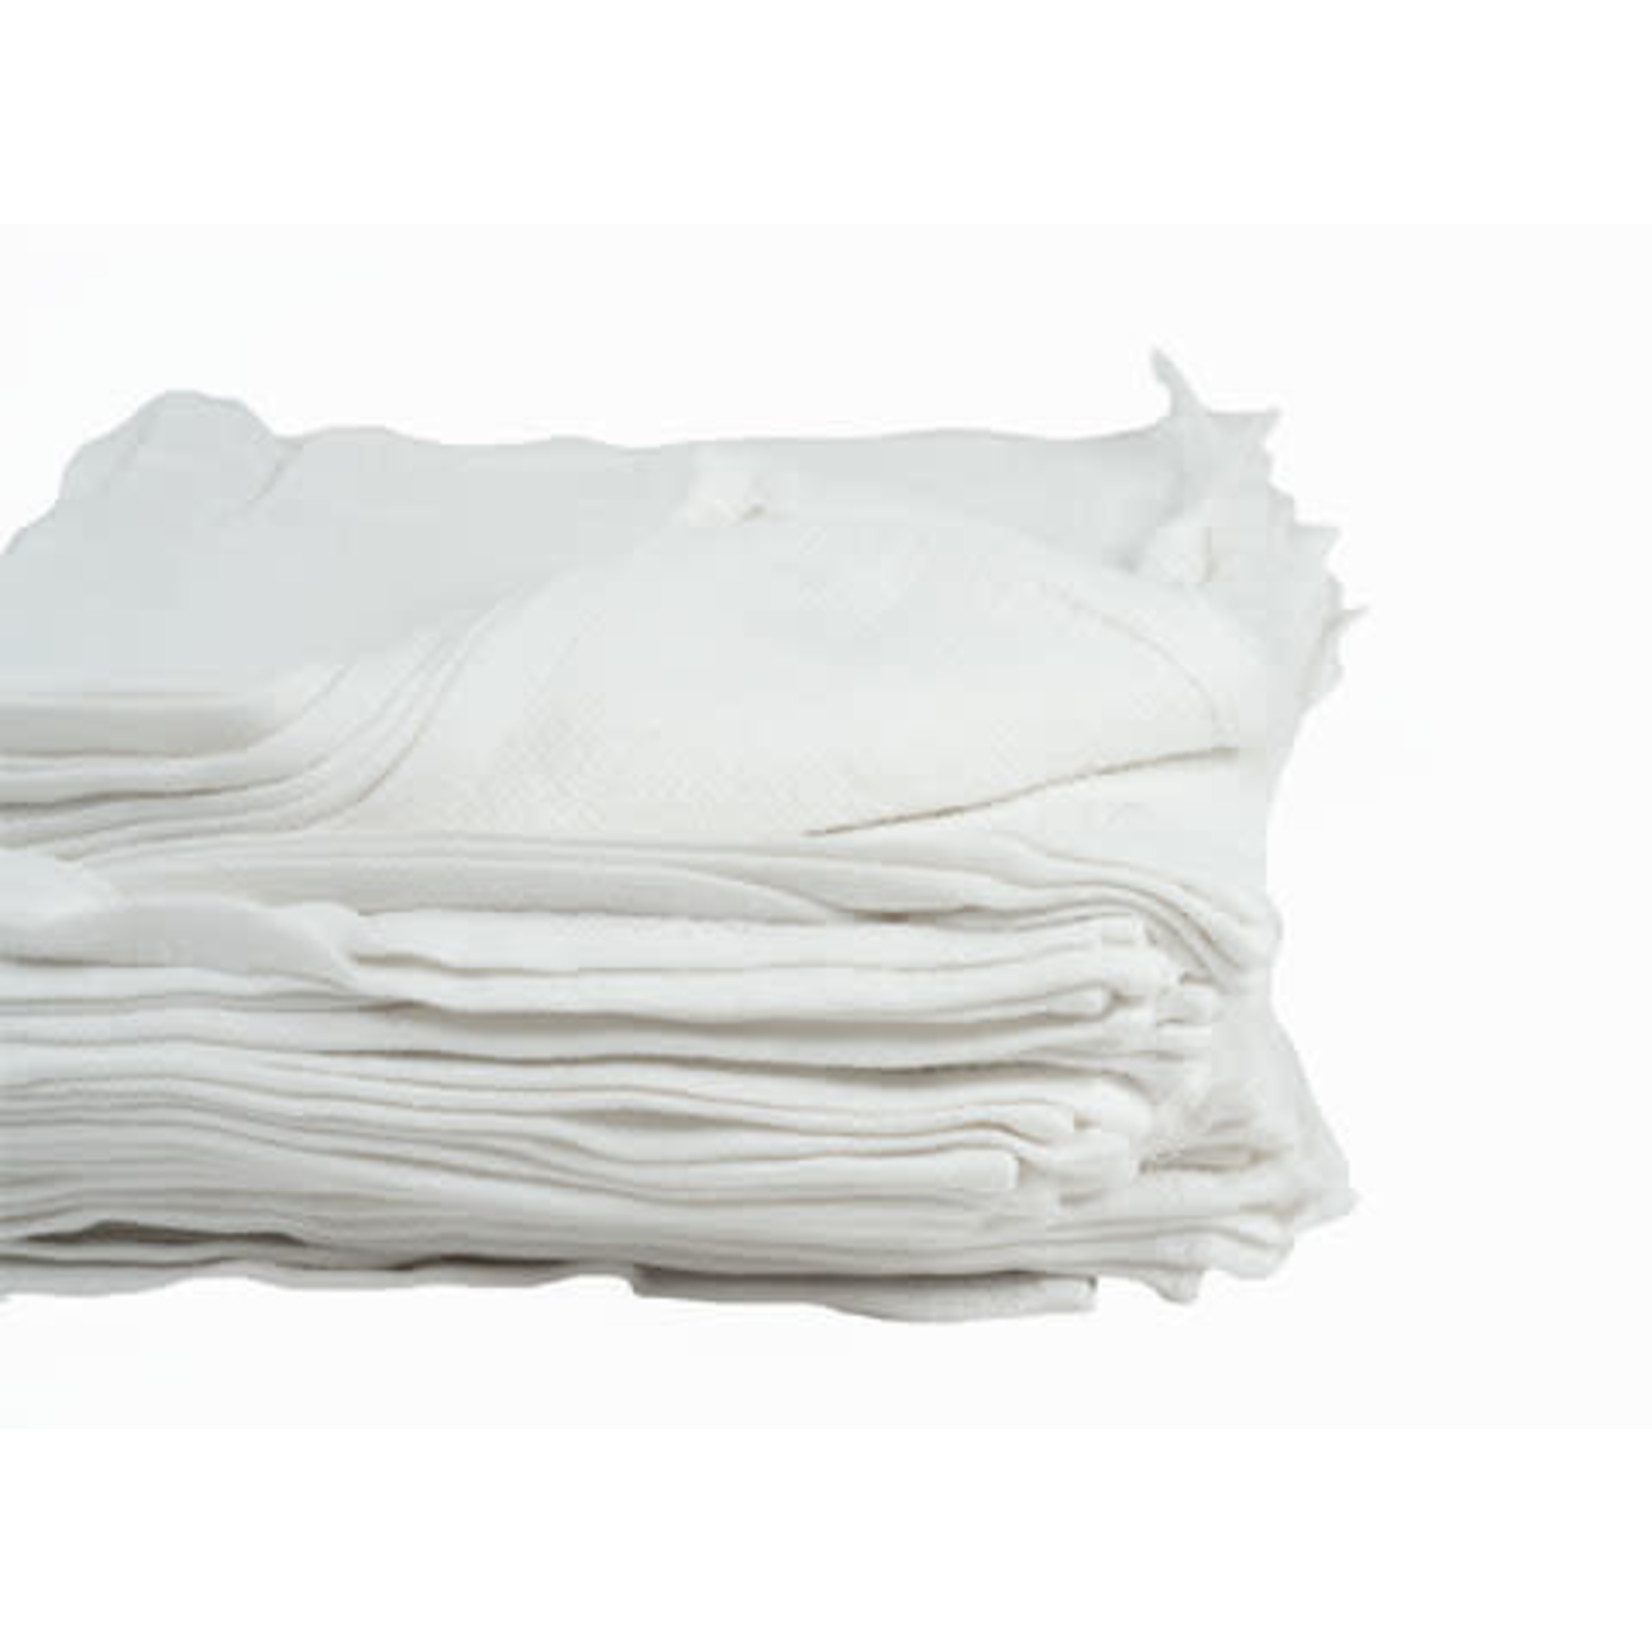 Terry Cloth towels